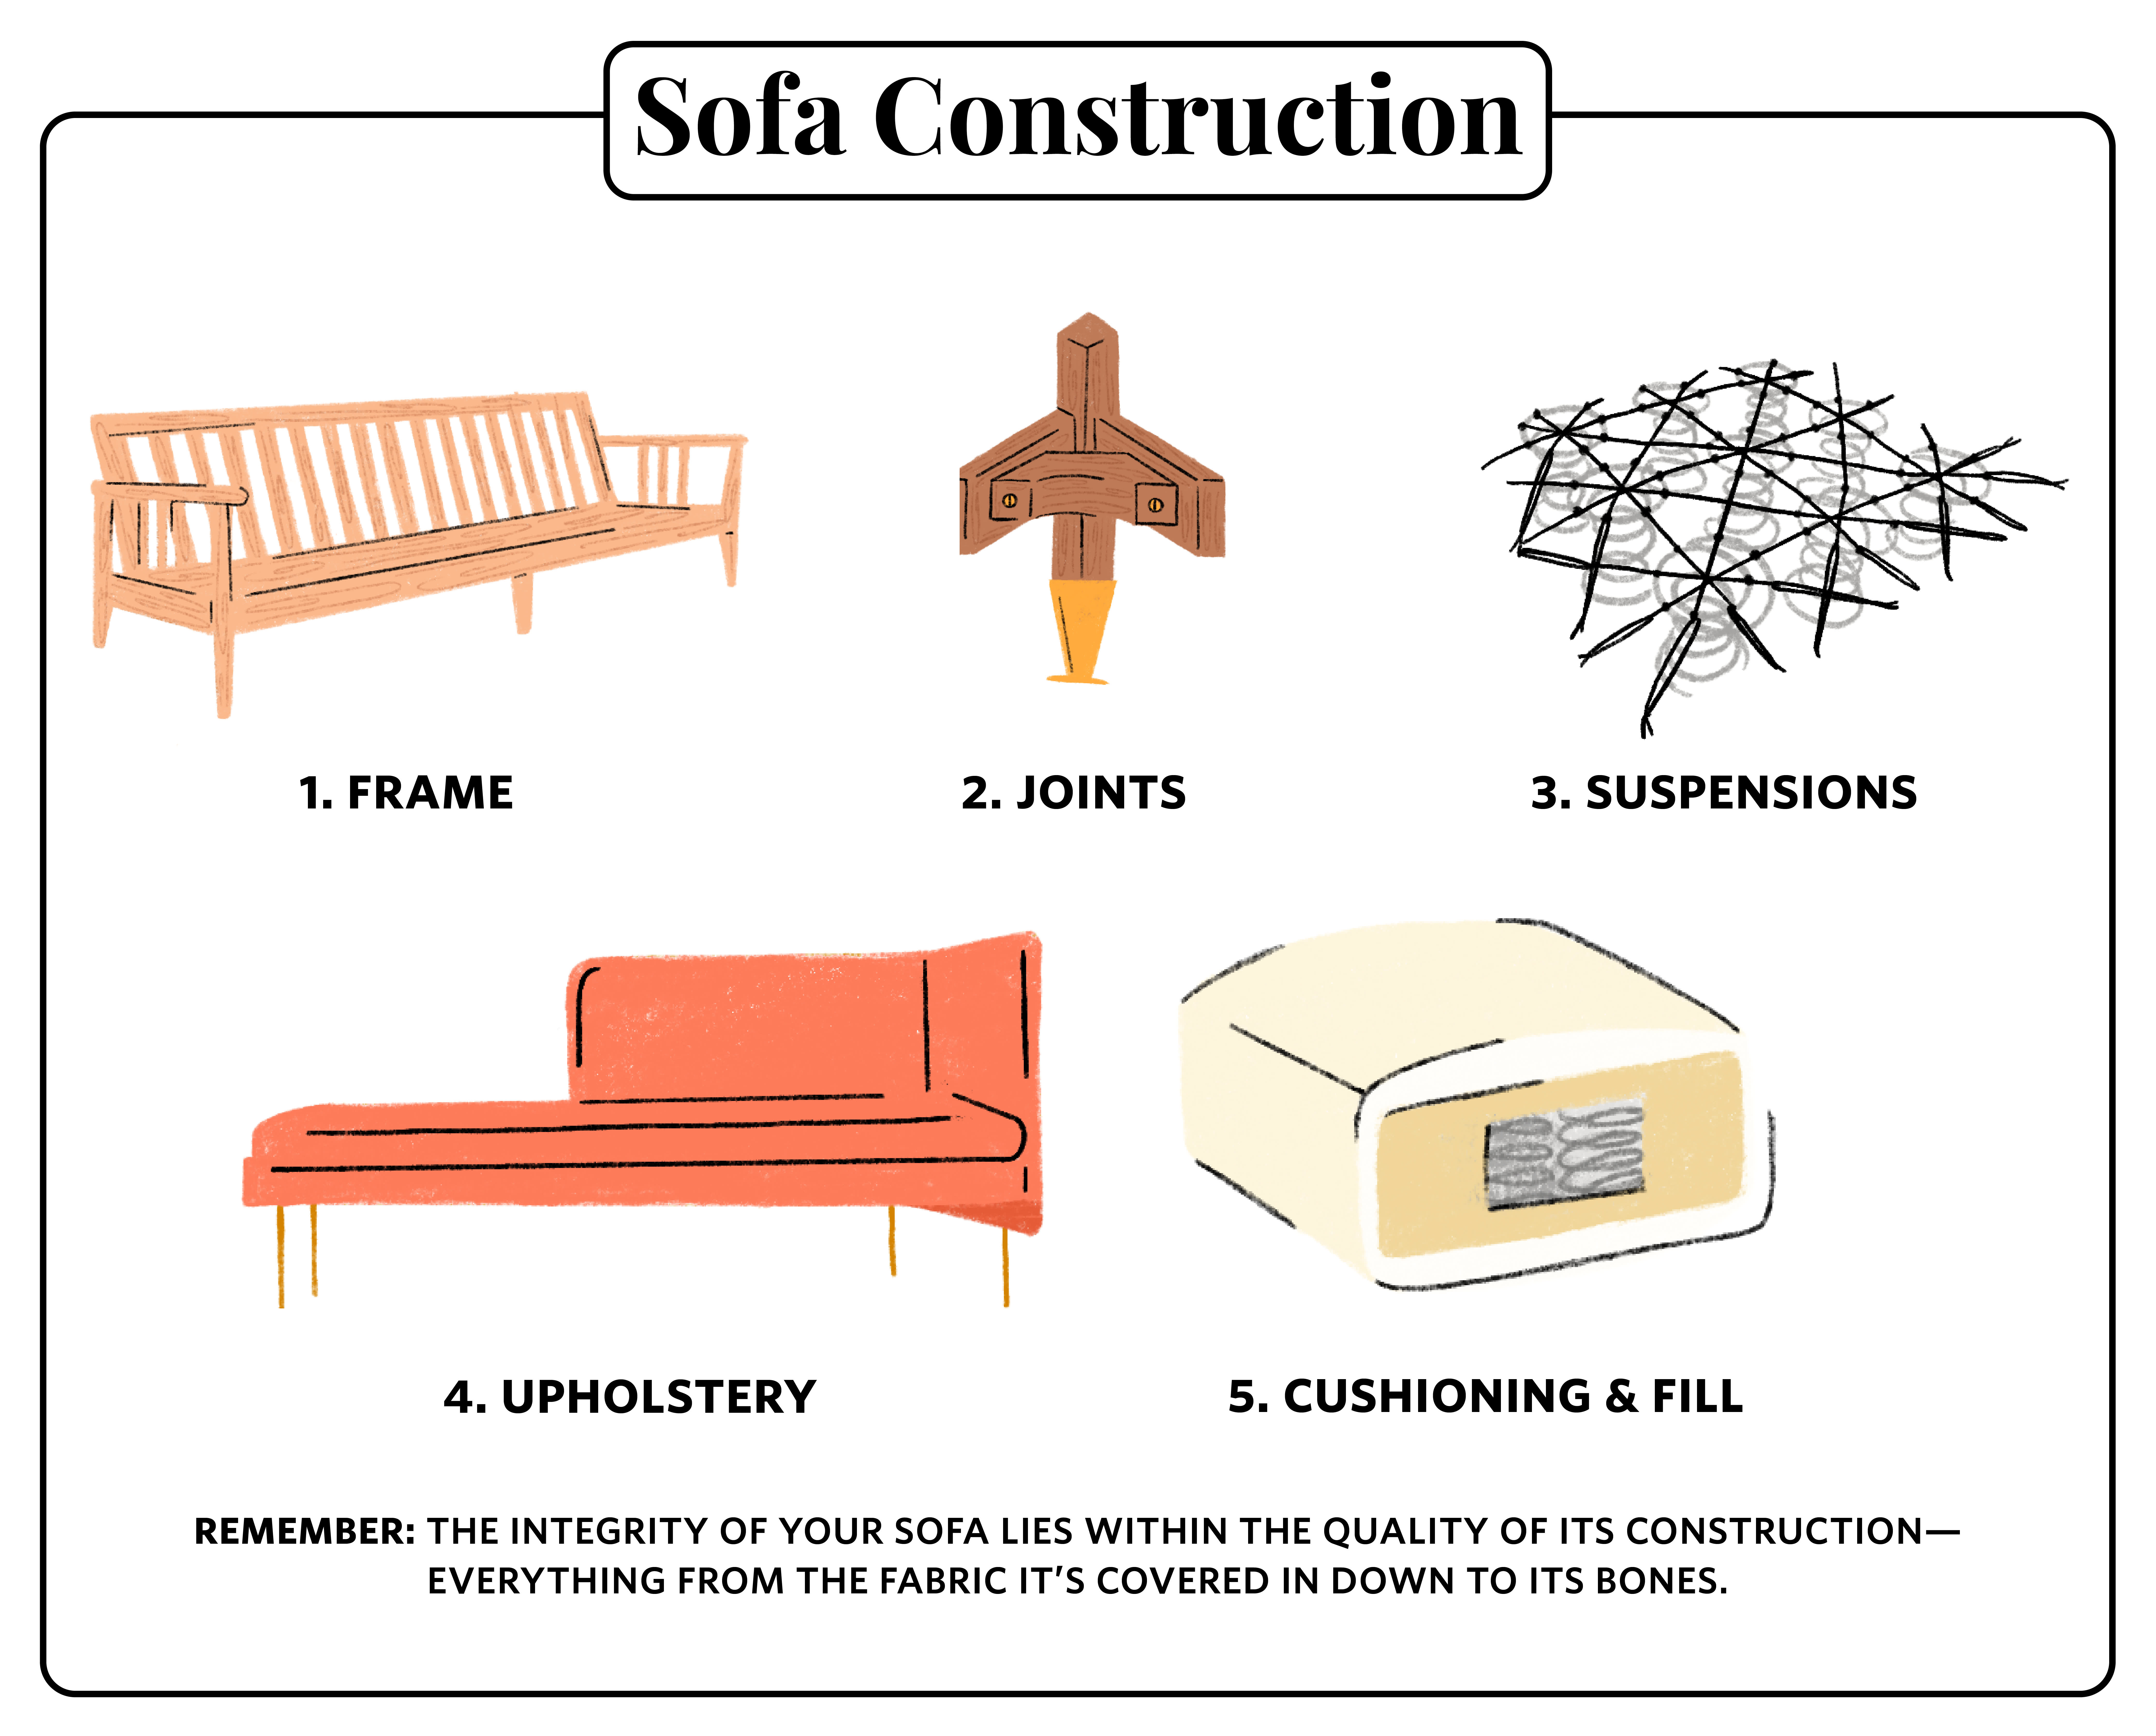 5 Types of Fill Commonly Used in Construction